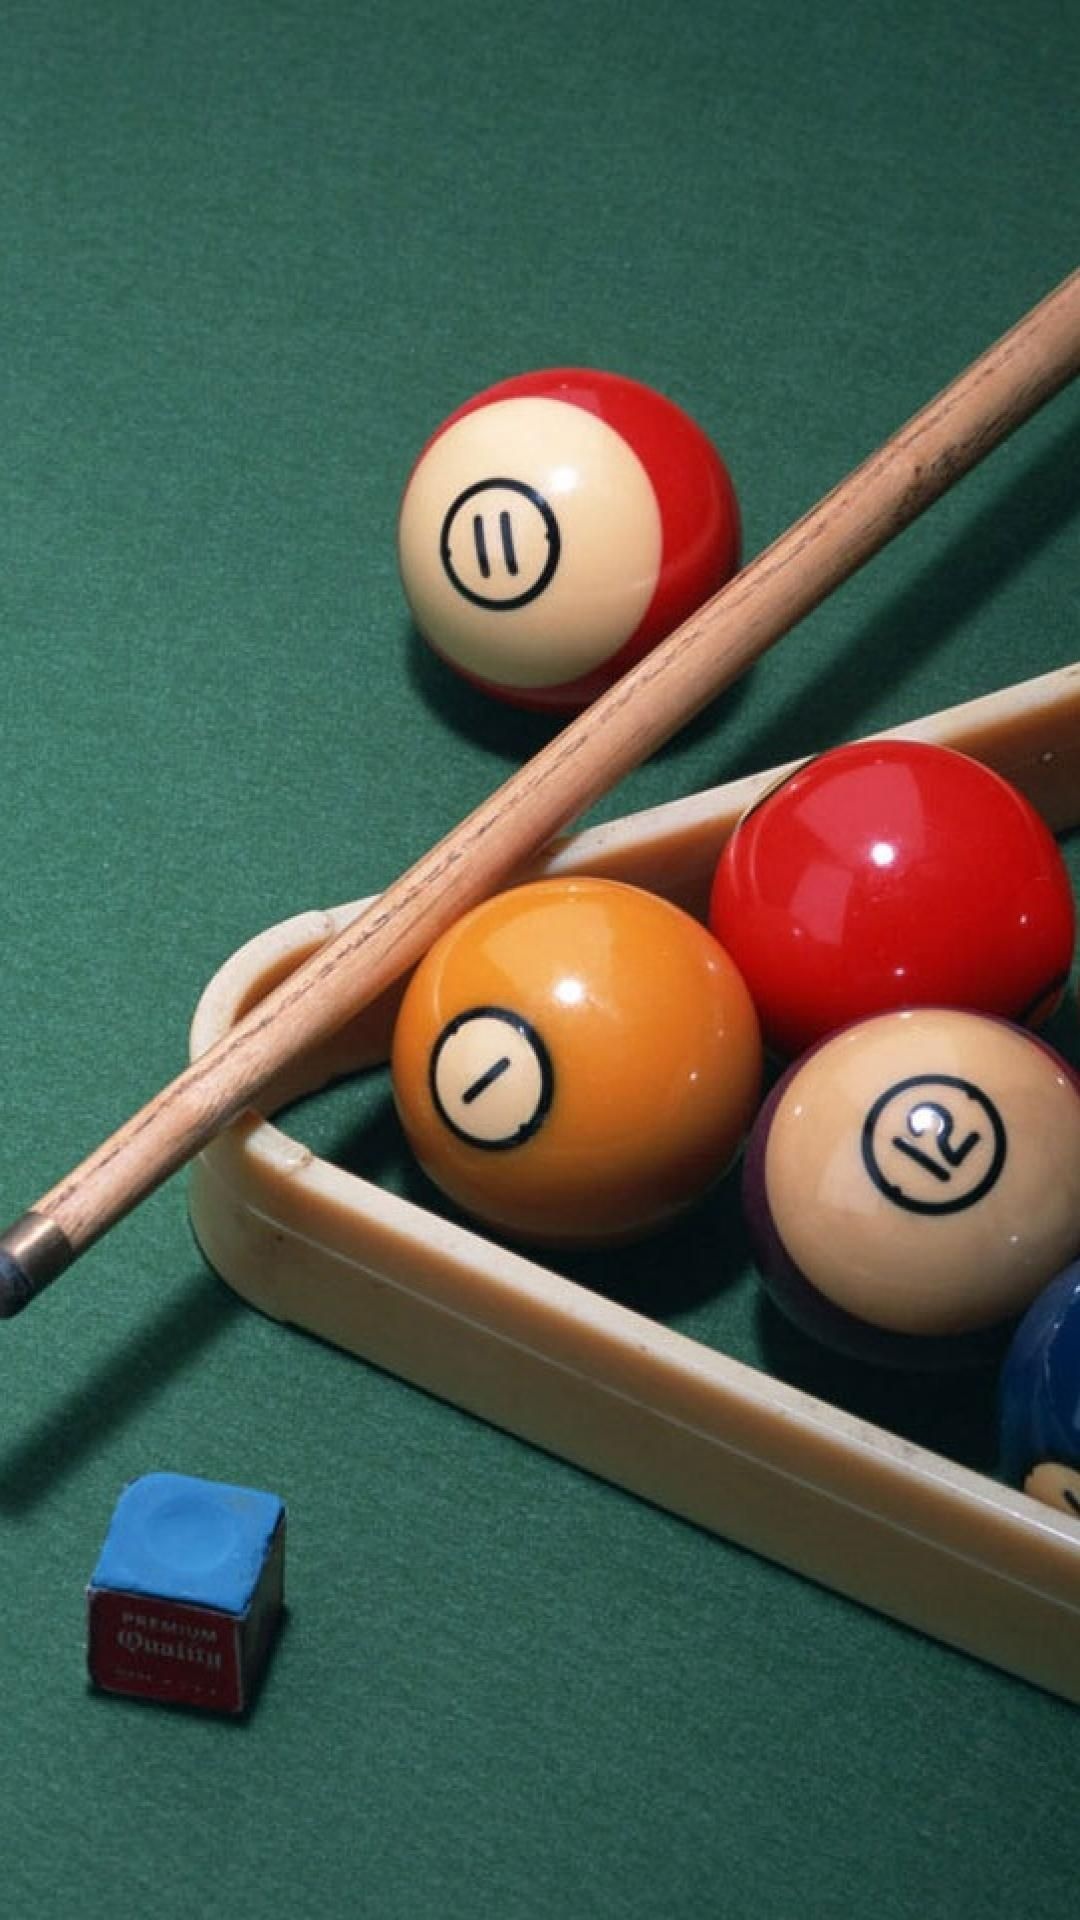 Billiards: Retro-style eight-ball game equipment, A cue stick, Object balls in a rack, A cue chalk. 1080x1920 Full HD Wallpaper.